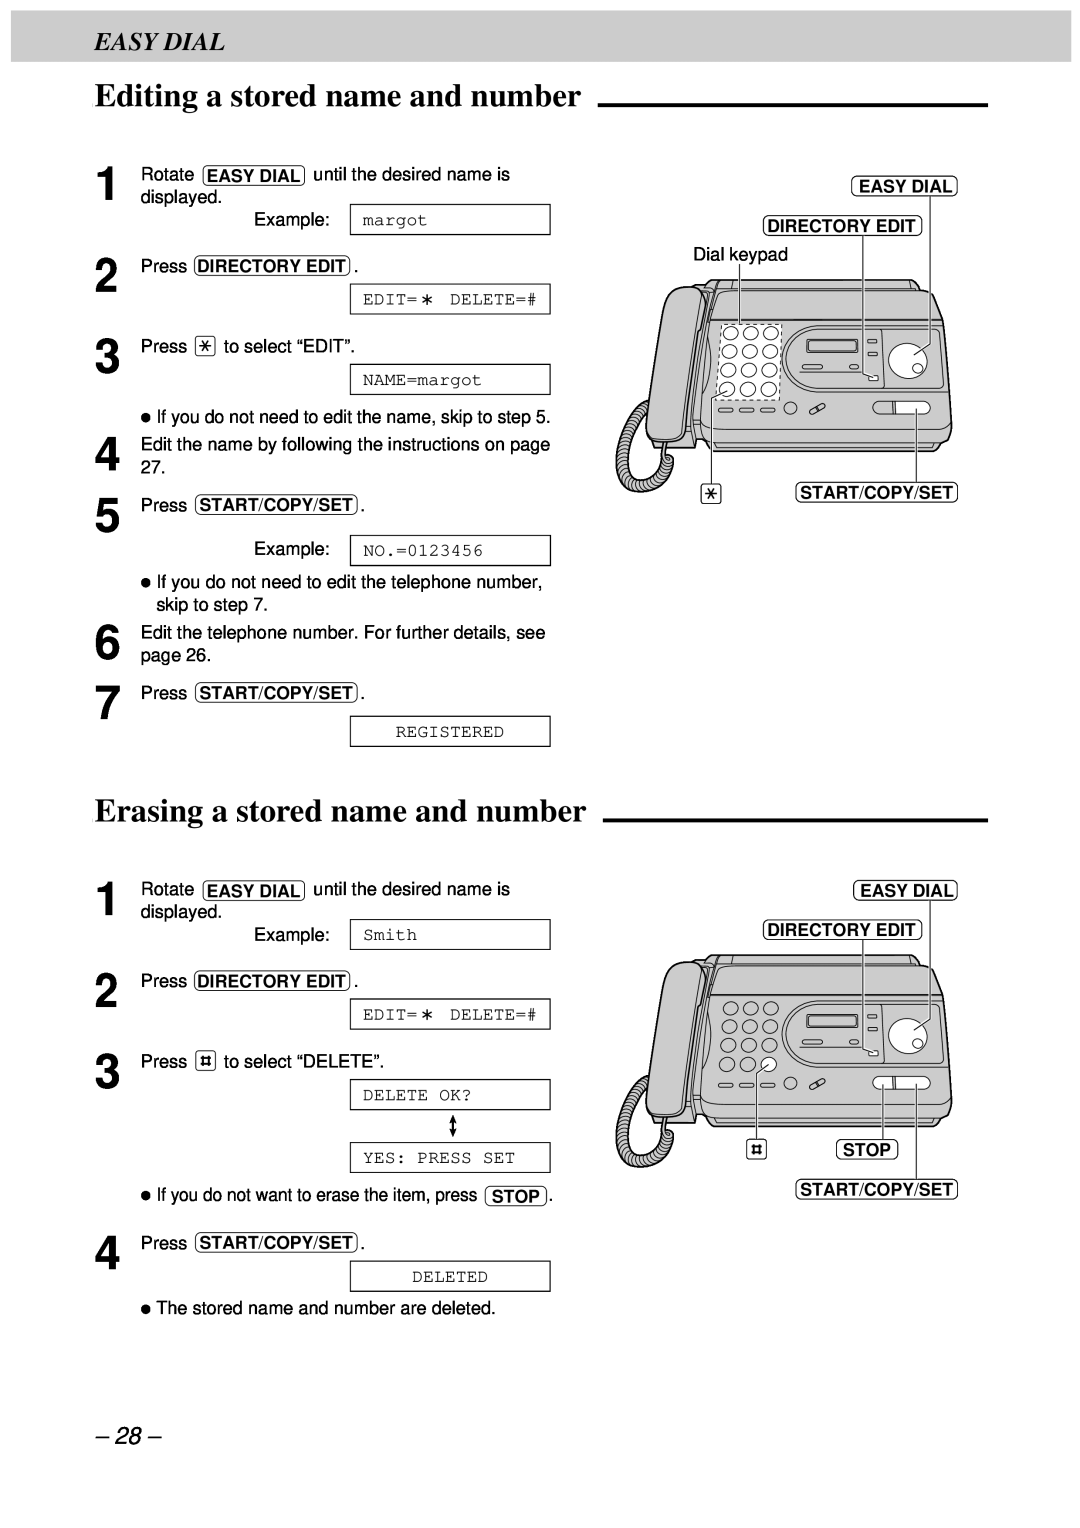 Panasonic KX-FT33HK, KX-FT34HK quick start Editing a stored name and number, Erasing a stored name and number, Easy Dial 